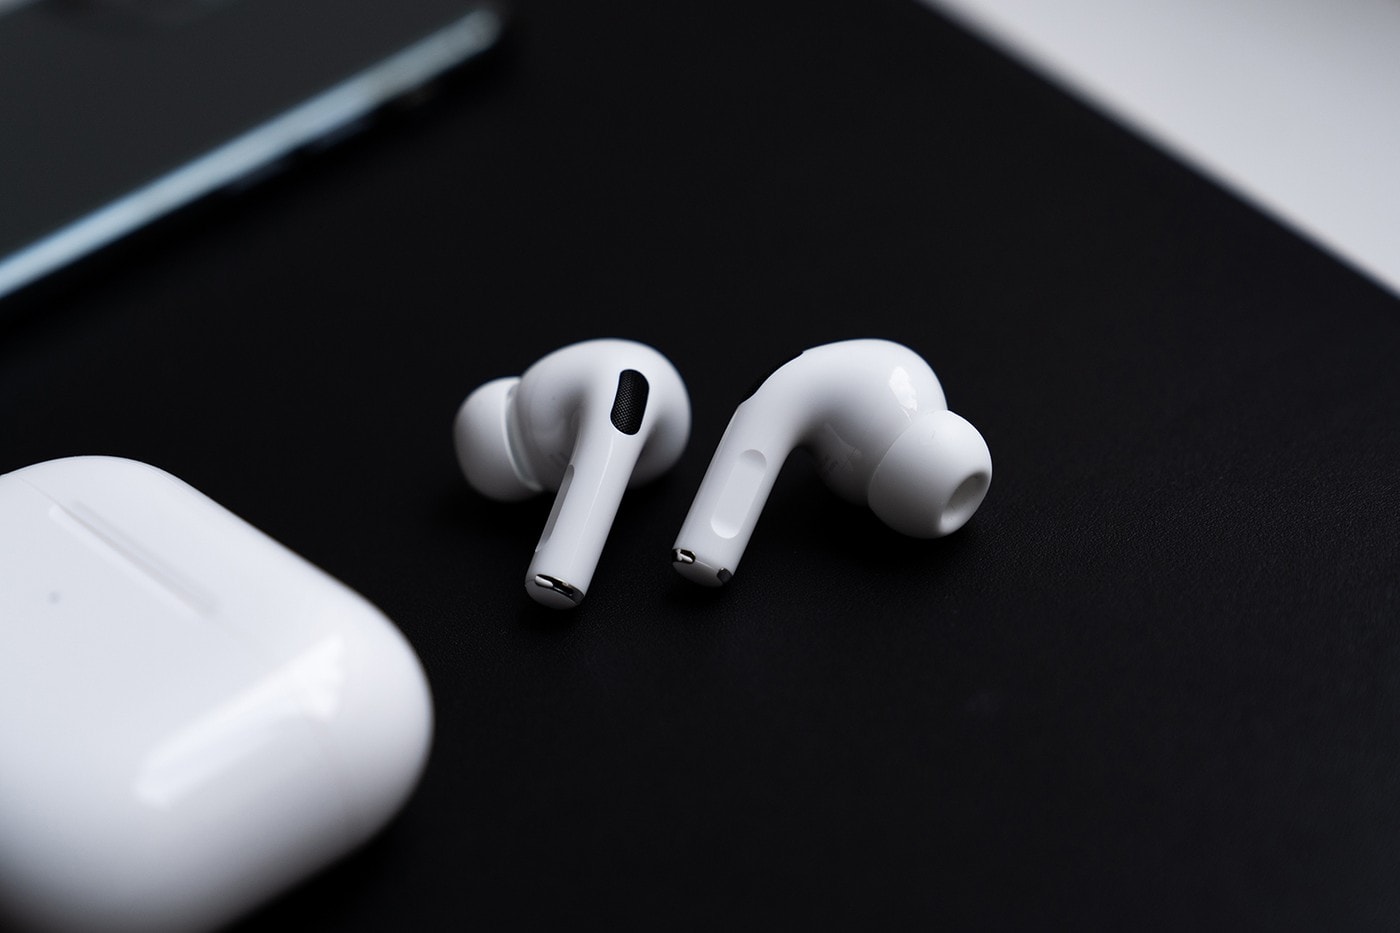 apple airpods pro sold out online stores